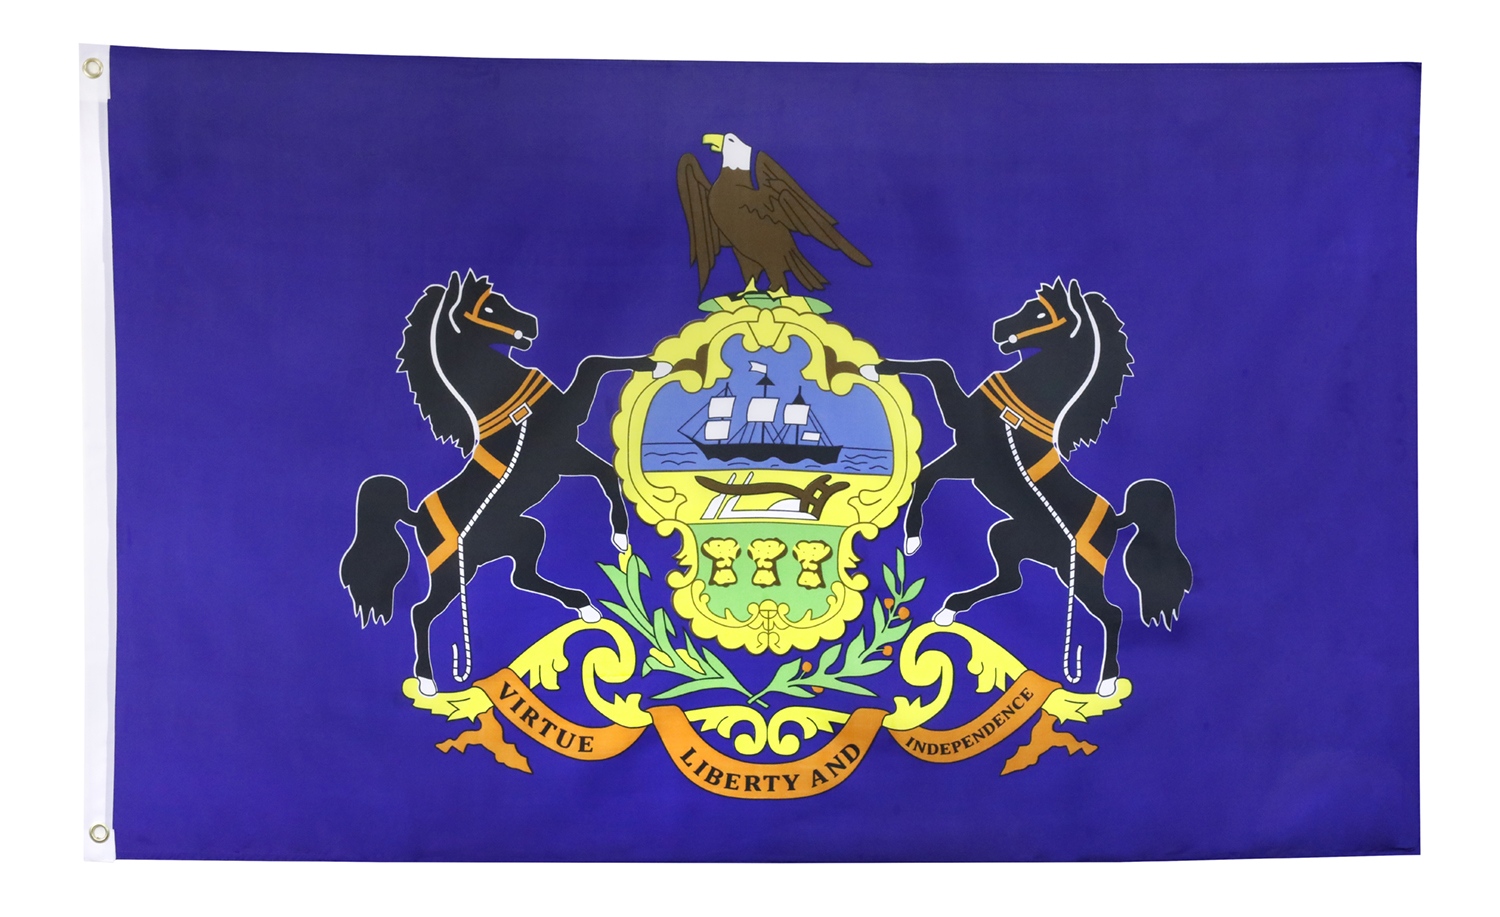 Shop72 - High Quality US State Flags - 100D 3x5 Polyester Flags - Pennsylvania One Size